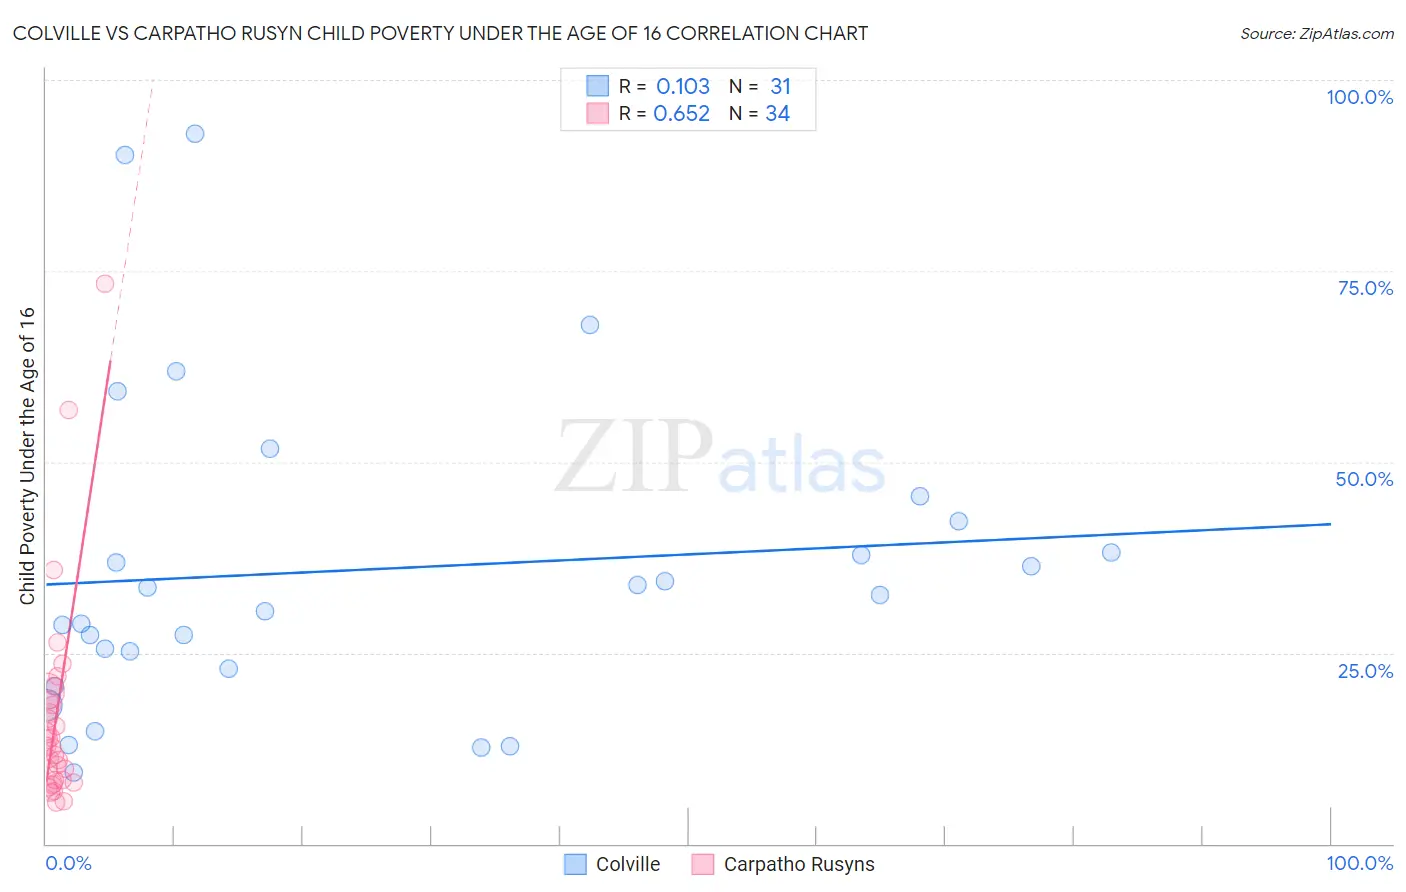 Colville vs Carpatho Rusyn Child Poverty Under the Age of 16